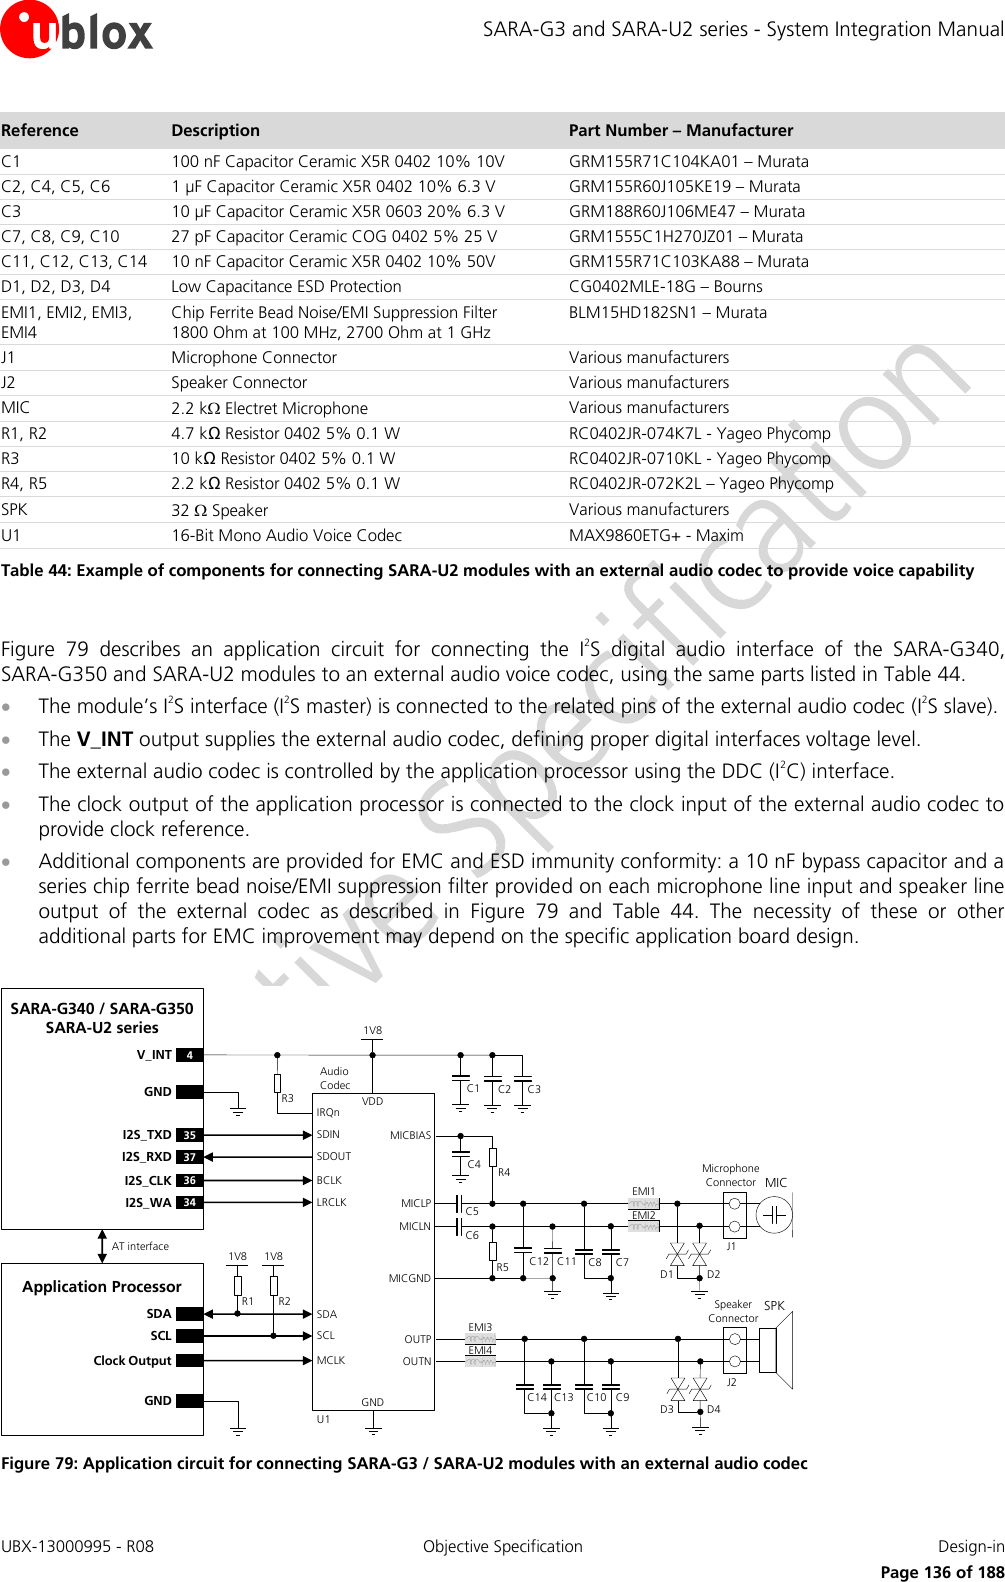 SARA-G3 and SARA-U2 series - System Integration Manual UBX-13000995 - R08  Objective Specification  Design-in     Page 136 of 188 Reference Description Part Number – Manufacturer C1 100 nF Capacitor Ceramic X5R 0402 10% 10V GRM155R71C104KA01 – Murata C2, C4, C5, C6 1 µF Capacitor Ceramic X5R 0402 10% 6.3 V GRM155R60J105KE19 – Murata C3 10 µF Capacitor Ceramic X5R 0603 20% 6.3 V GRM188R60J106ME47 – Murata C7, C8, C9, C10 27 pF Capacitor Ceramic COG 0402 5% 25 V  GRM1555C1H270JZ01 – Murata C11, C12, C13, C14 10 nF Capacitor Ceramic X5R 0402 10% 50V GRM155R71C103KA88 – Murata D1, D2, D3, D4 Low Capacitance ESD Protection CG0402MLE-18G – Bourns EMI1, EMI2, EMI3, EMI4 Chip Ferrite Bead Noise/EMI Suppression Filter 1800 Ohm at 100 MHz, 2700 Ohm at 1 GHz BLM15HD182SN1 – Murata J1 Microphone Connector Various manufacturers  J2 Speaker Connector Various manufacturers  MIC 2.2 k Electret Microphone Various manufacturers R1, R2  4.7 kΩ Resistor 0402 5% 0.1 W  RC0402JR-074K7L - Yageo Phycomp R3 10 kΩ Resistor 0402 5% 0.1 W  RC0402JR-0710KL - Yageo Phycomp R4, R5 2.2 kΩ Resistor 0402 5% 0.1 W  RC0402JR-072K2L – Yageo Phycomp SPK 32  Speaker Various manufacturers  U1 16-Bit Mono Audio Voice Codec MAX9860ETG+ - Maxim Table 44: Example of components for connecting SARA-U2 modules with an external audio codec to provide voice capability  Figure  79  describes  an  application  circuit  for  connecting  the  I2S  digital  audio  interface  of  the  SARA-G340, SARA-G350 and SARA-U2 modules to an external audio voice codec, using the same parts listed in Table 44.  The module’s I2S interface (I2S master) is connected to the related pins of the external audio codec (I2S slave).  The V_INT output supplies the external audio codec, defining proper digital interfaces voltage level.  The external audio codec is controlled by the application processor using the DDC (I2C) interface.  The clock output of the application processor is connected to the clock input of the external audio codec to provide clock reference.  Additional components are provided for EMC and ESD immunity conformity: a 10 nF bypass capacitor and a series chip ferrite bead noise/EMI suppression filter provided on each microphone line input and speaker line output  of  the  external  codec  as  described  in  Figure  79  and  Table  44.  The  necessity  of  these  or  other additional parts for EMC improvement may depend on the specific application board design.  R2R1GNDU1SARA-G340 / SARA-G350 SARA-U2 seriesAudio   CodecSDASCLSDASCLClock Output MCLKGNDR3 C3C2C14V_INTVDD1V8MICBIASC4 R4C5C6EMI1MICLNMICLPMicrophone ConnectorEMI2MICC12 C11J1MICGNDR5 C8 C7SPKSpeaker ConnectorOUTPOUTNJ2C10 C9C14 C13EMI3EMI4IRQnBCLKLRCLKSDINSDOUT36I2S_CLK34I2S_WA35I2S_TXD37I2S_RXD1V81V8Application ProcessorGNDAT interfaceD3D1D4D2 Figure 79: Application circuit for connecting SARA-G3 / SARA-U2 modules with an external audio codec  